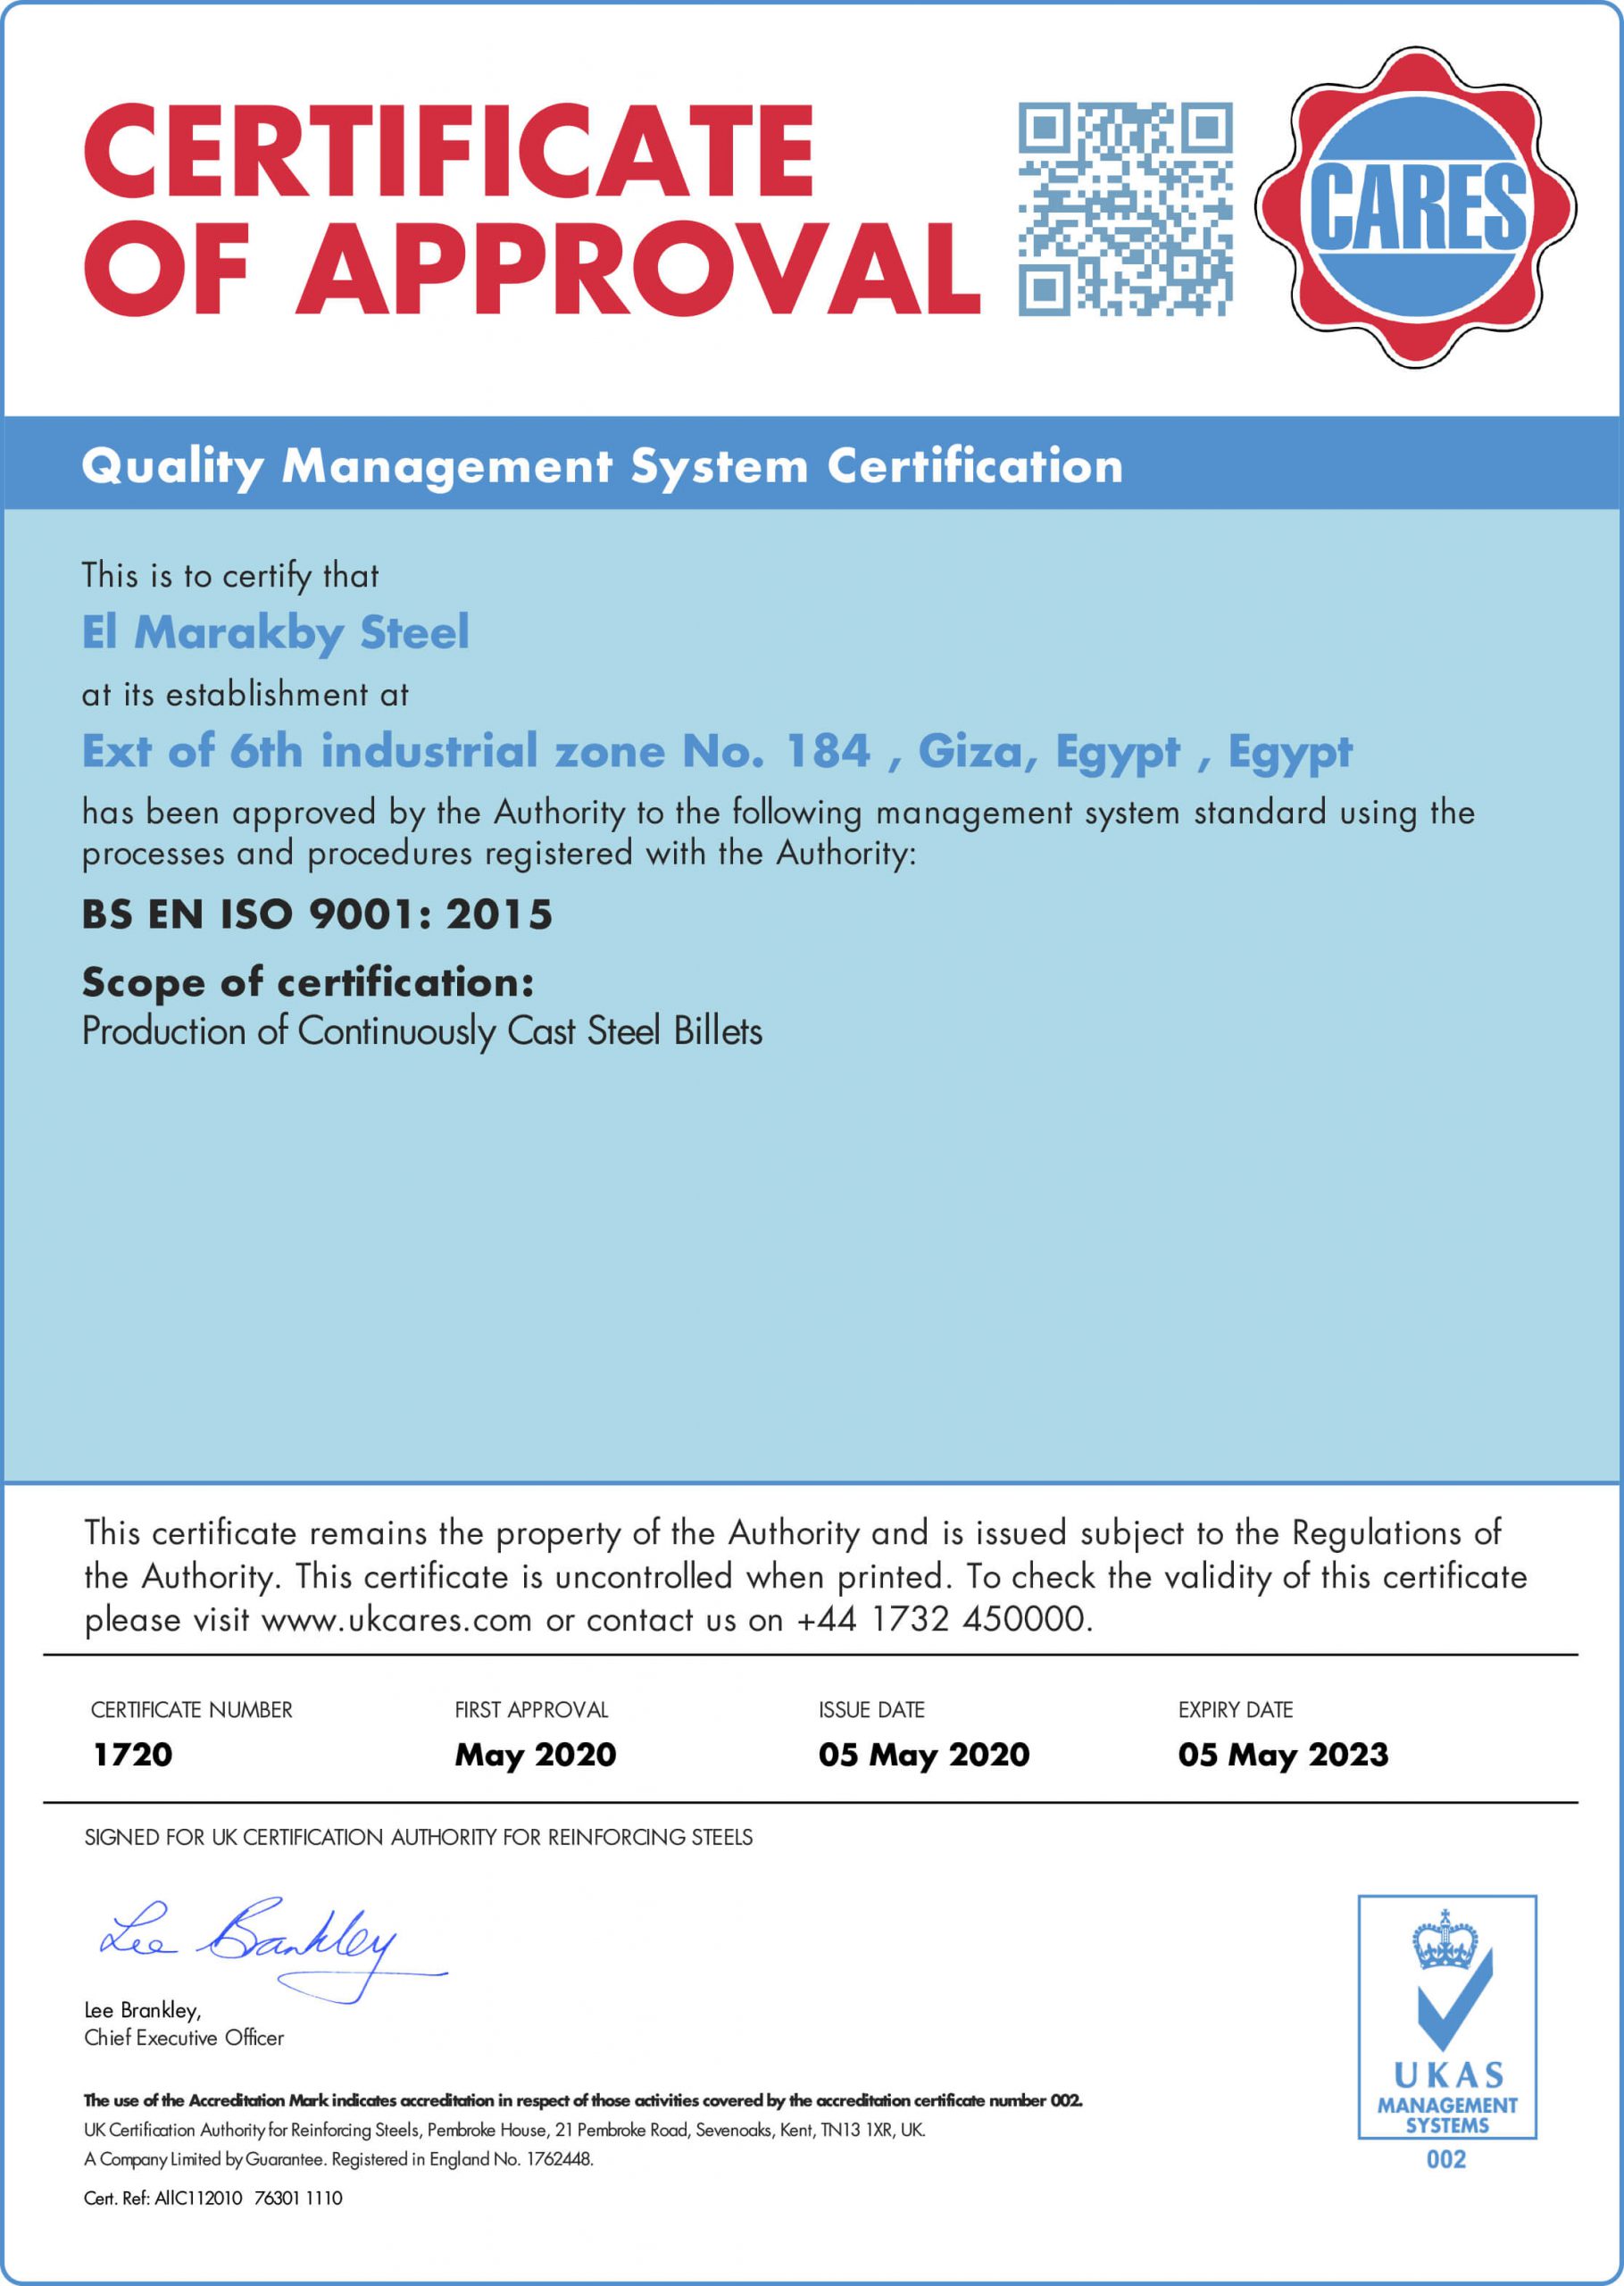 CARES ISO 9001 2015 MKS